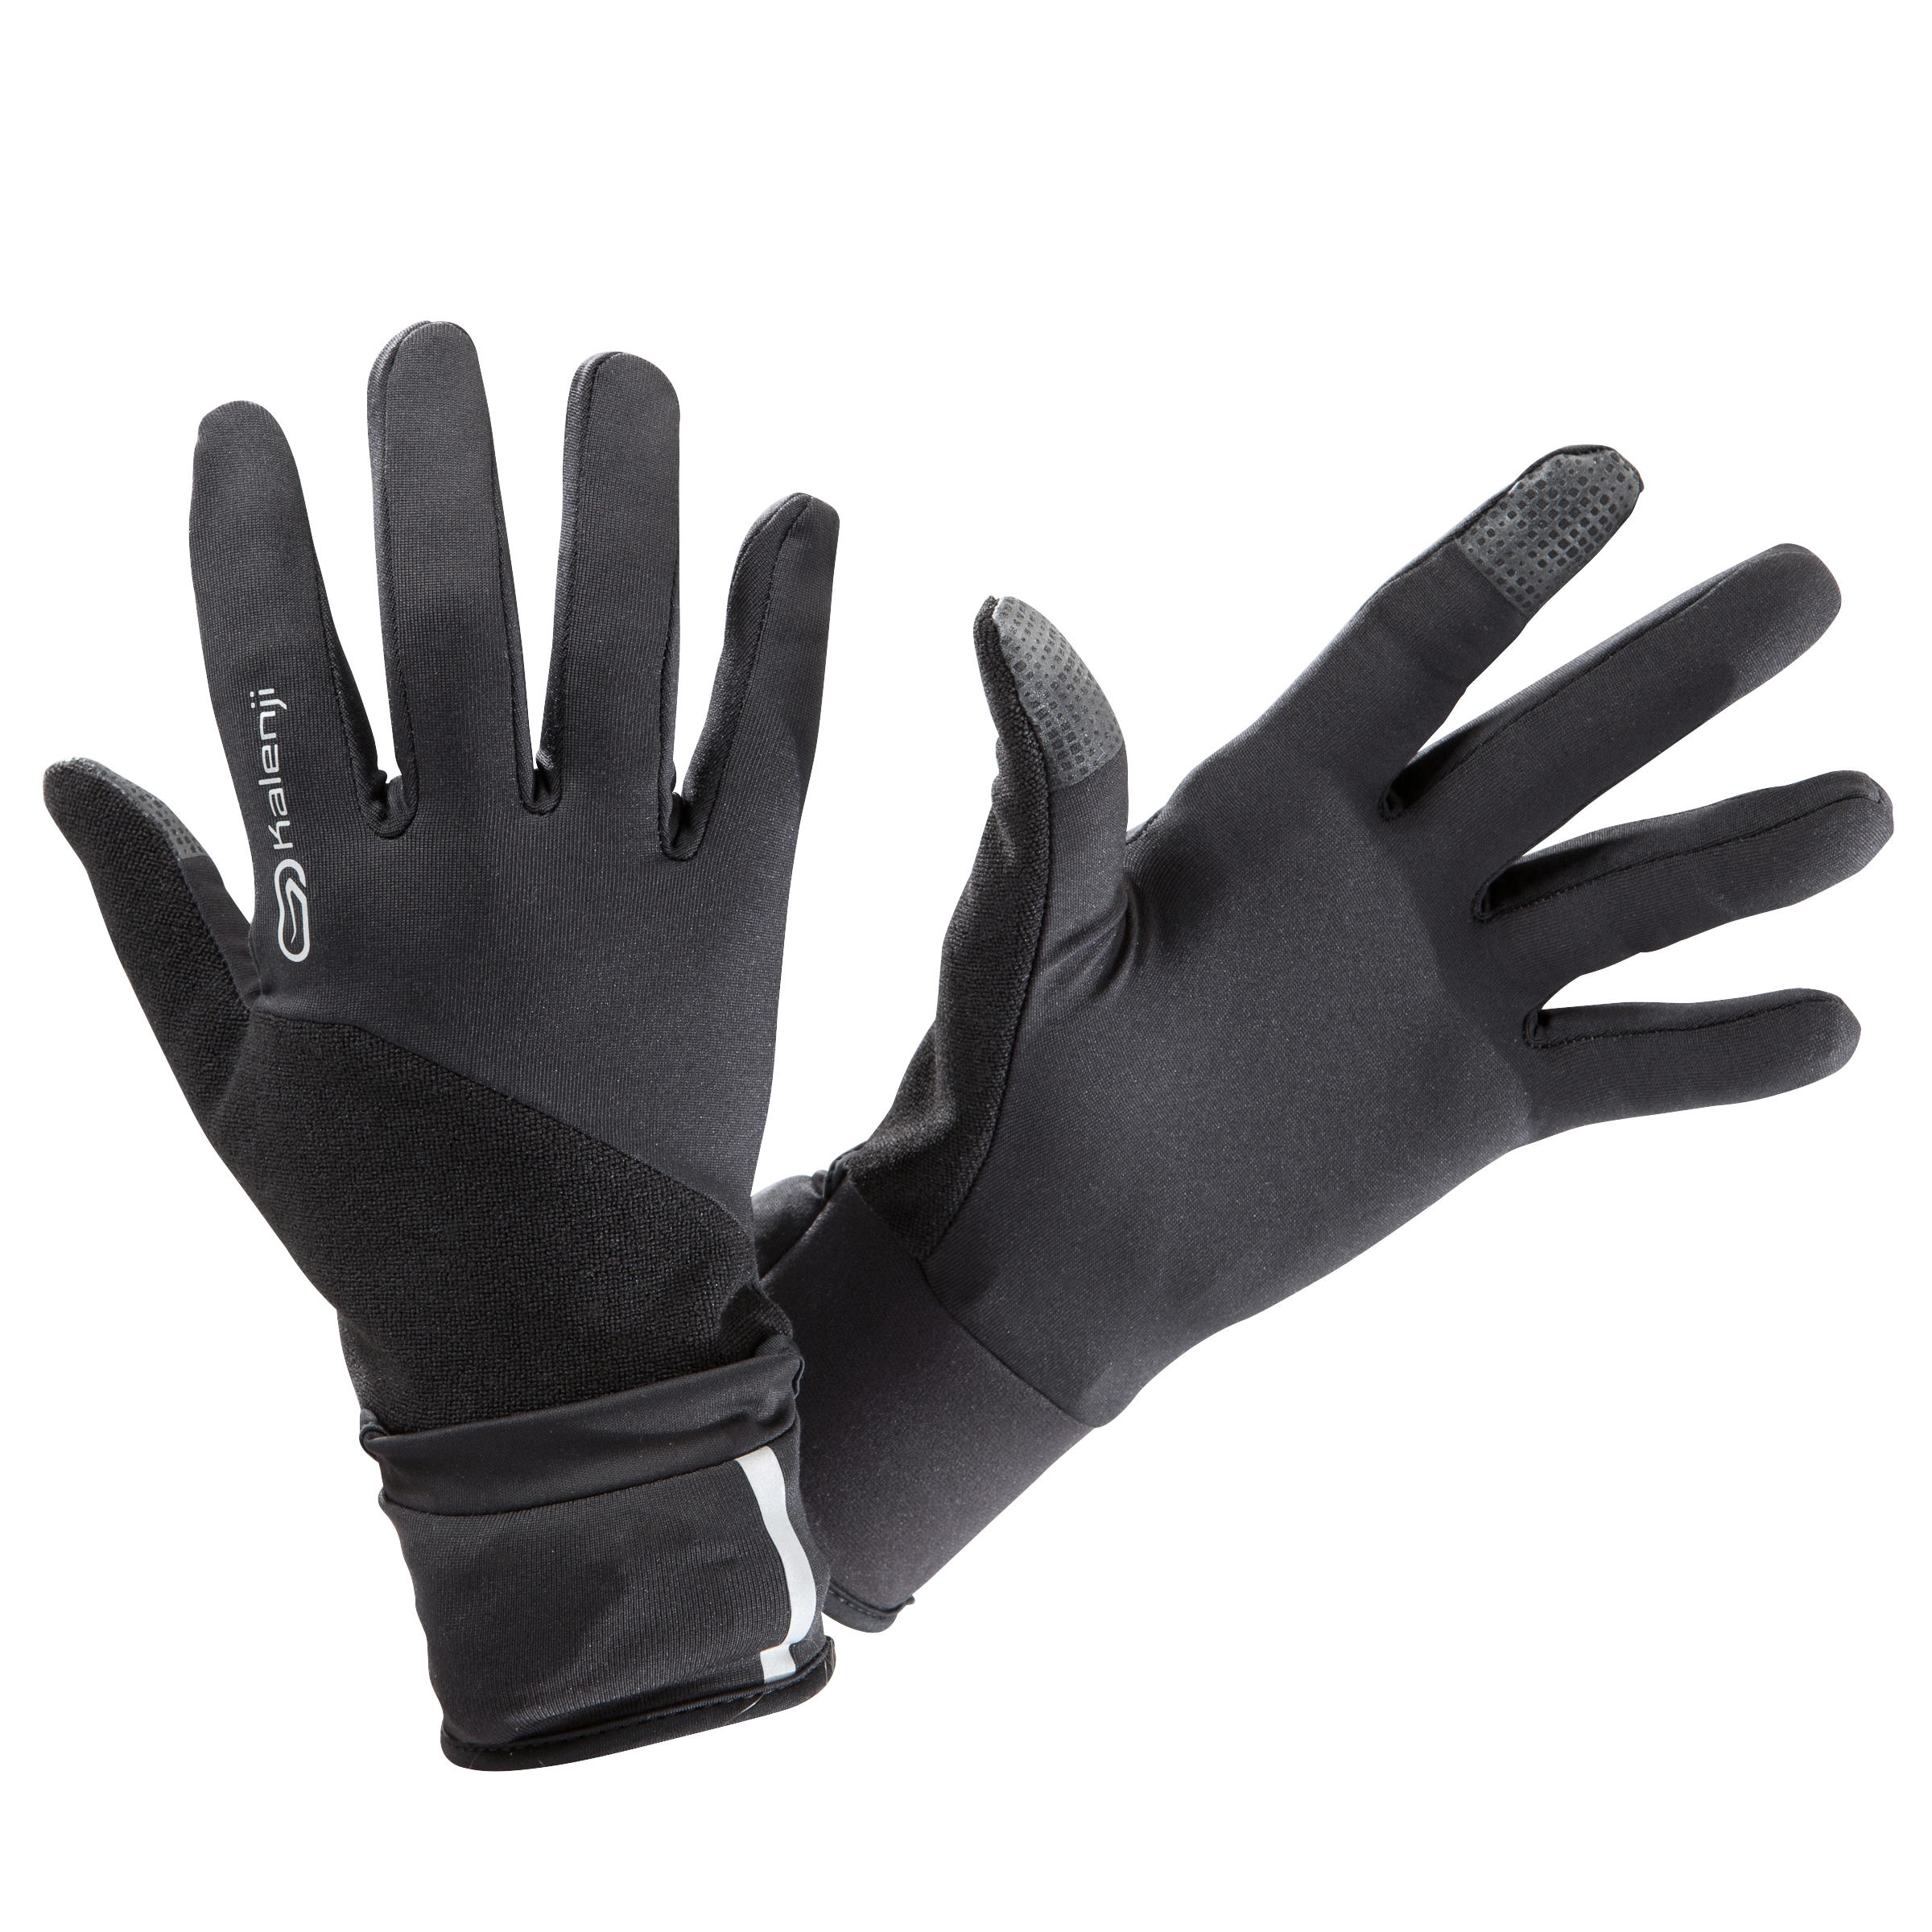 EVOLUTIV BY NIGHT GLOVES BLACK additional mittent cover 1/12